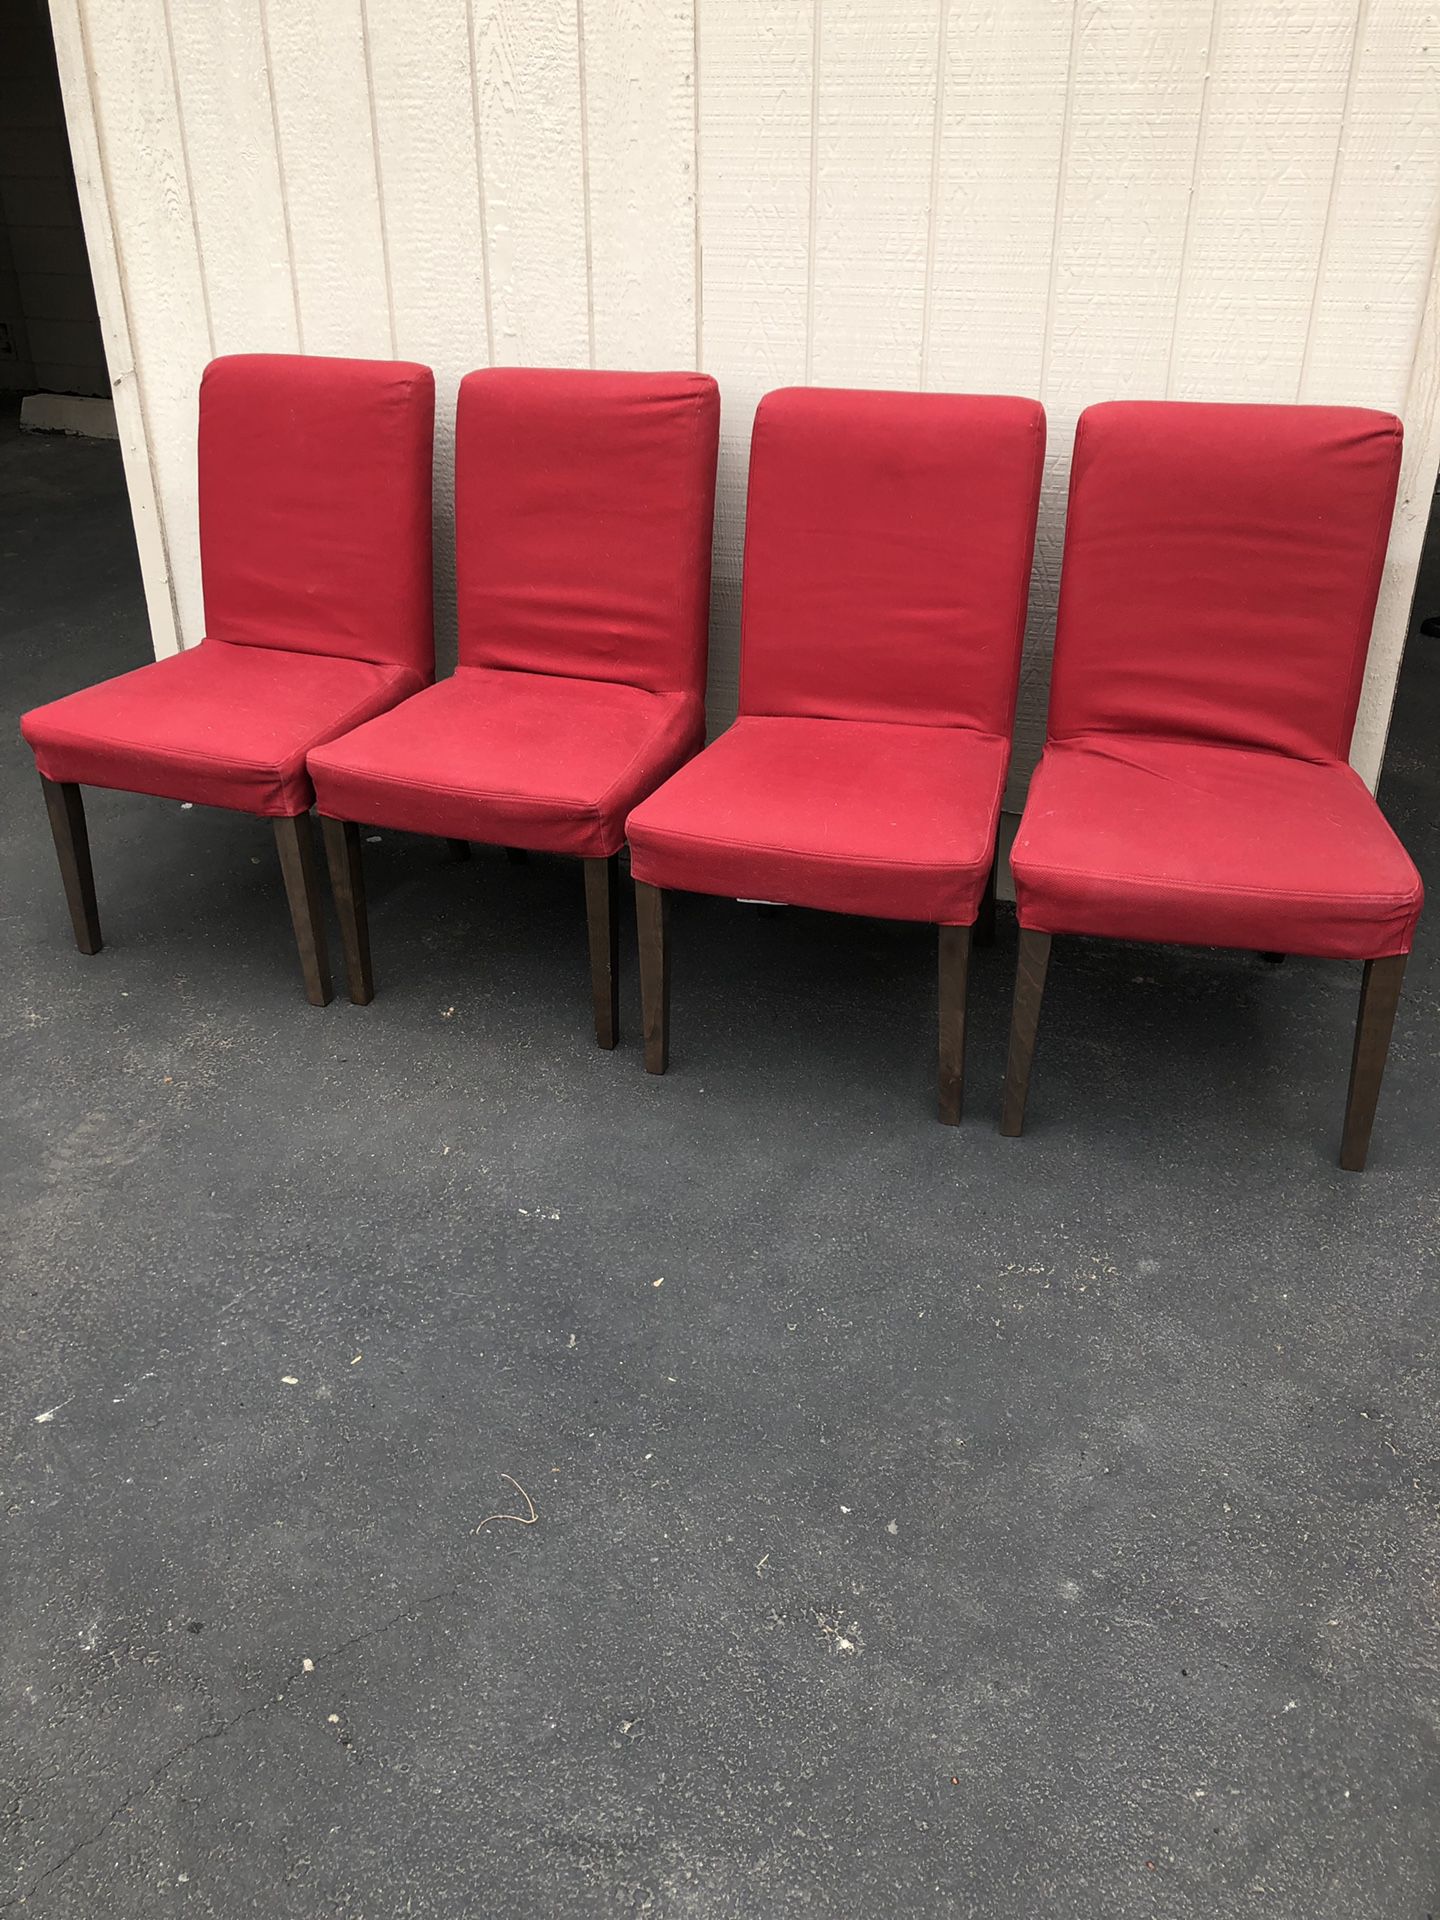 4 IKEA Chairs w/ Red Covers, $15 each